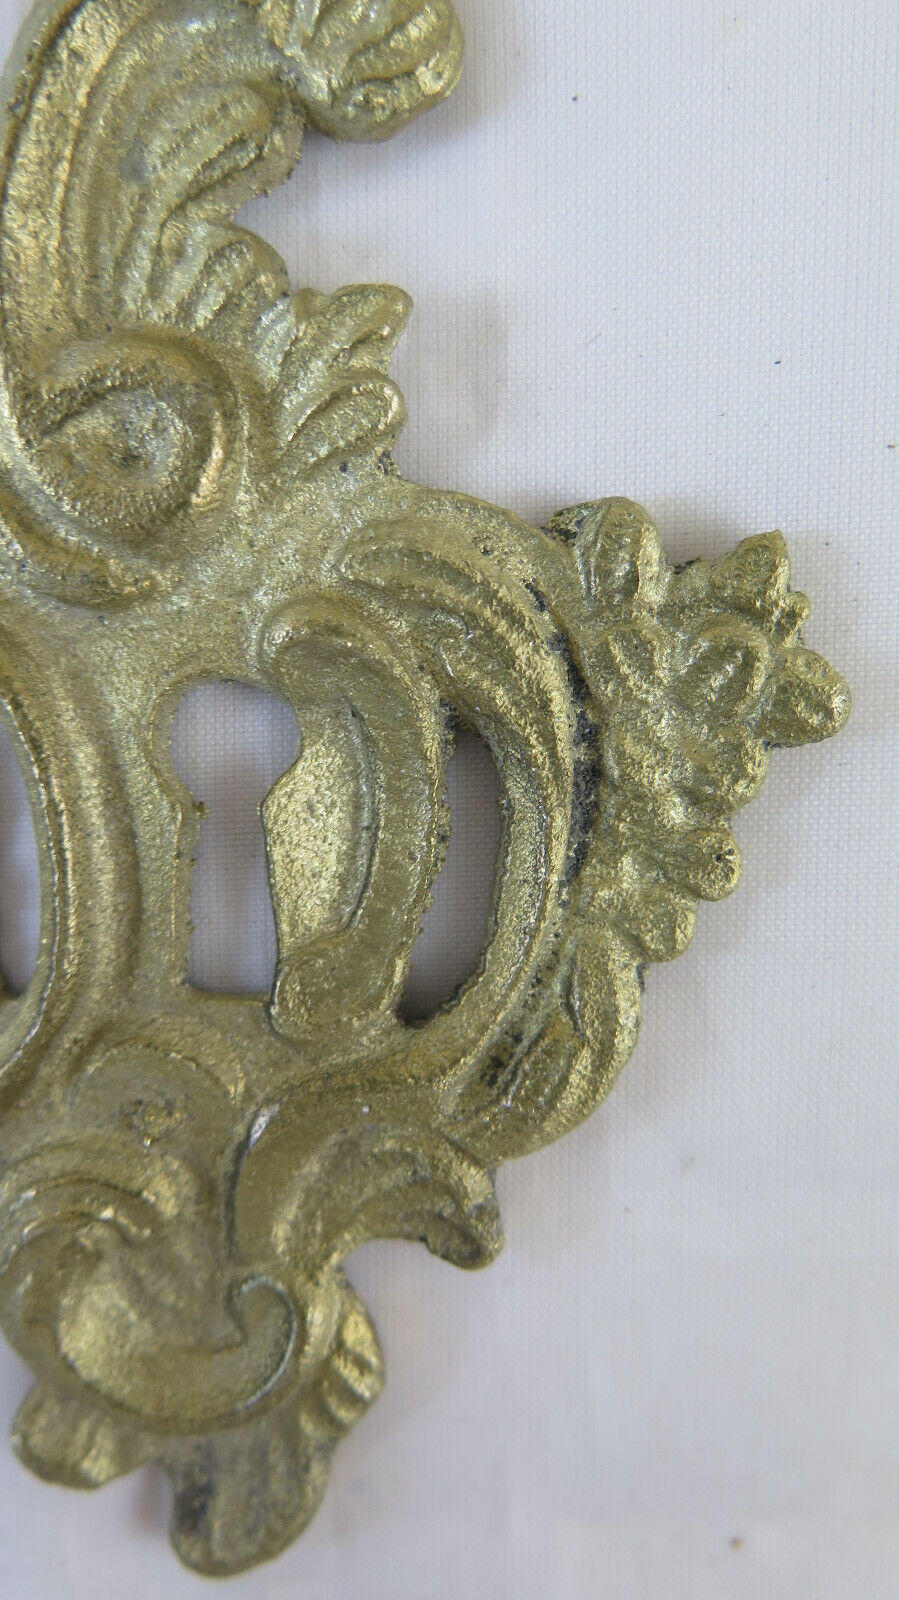 9 GRIDS FOR ANTIQUE FURNITURE IN GOLDEN BRONZE BAROQUE GOLD LOCK COVER CH28